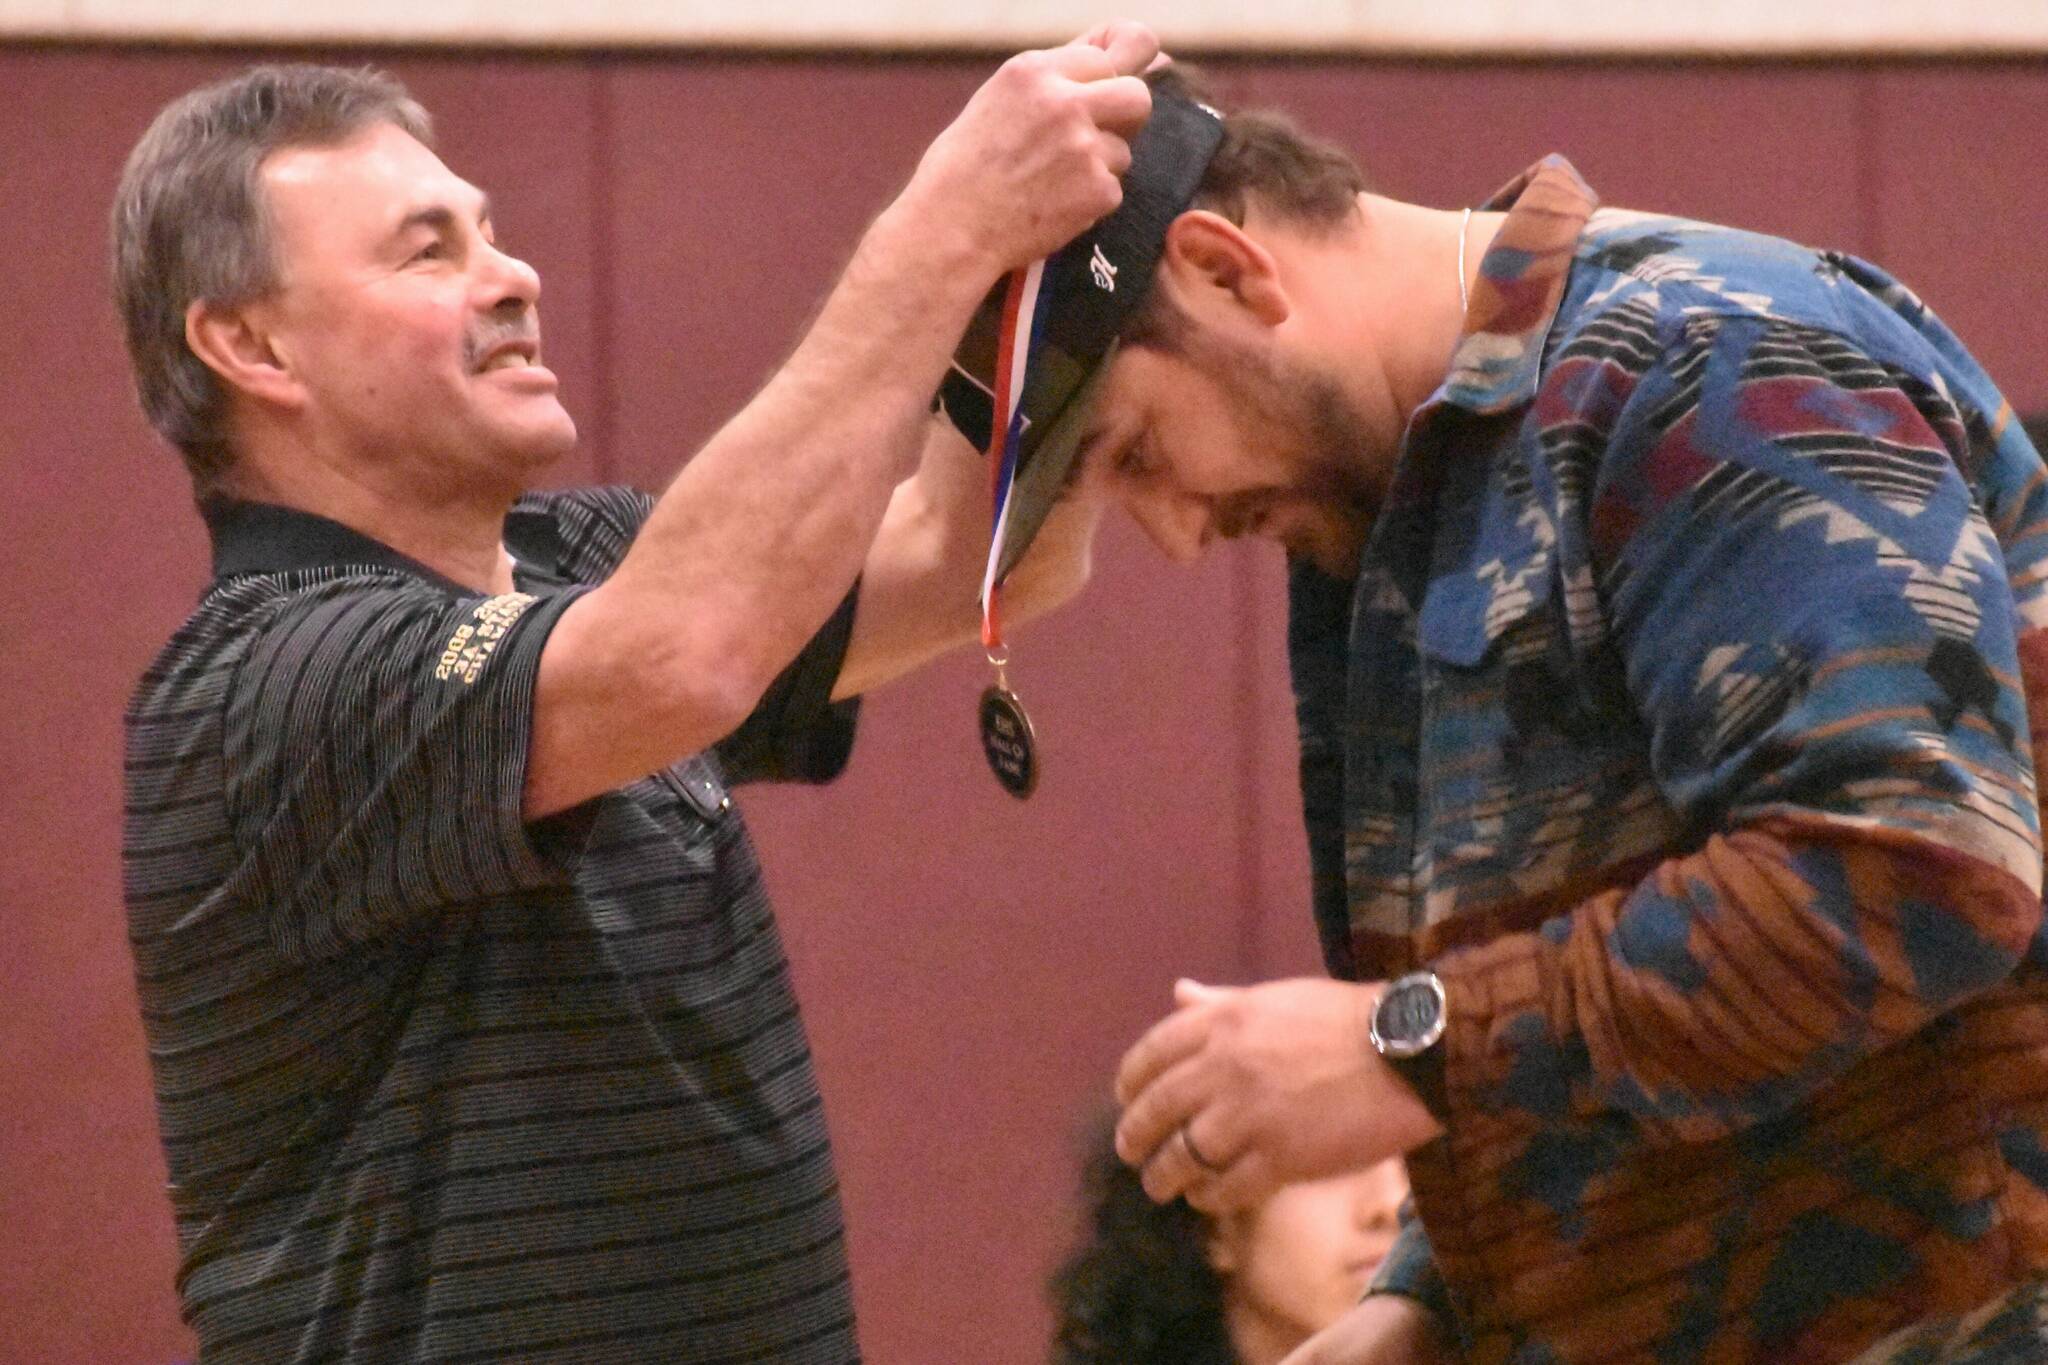 The EHS Athletic Hall of Fame welcomed three new additions the evening of January 4, all from the world of Hornet wrestling. Pictured here is Lee Reichert, who coached the 2008 state title-winning team, placing a Hall of Fame medal around the next of team member DJ Qualls. Photo by Kevin Hanson